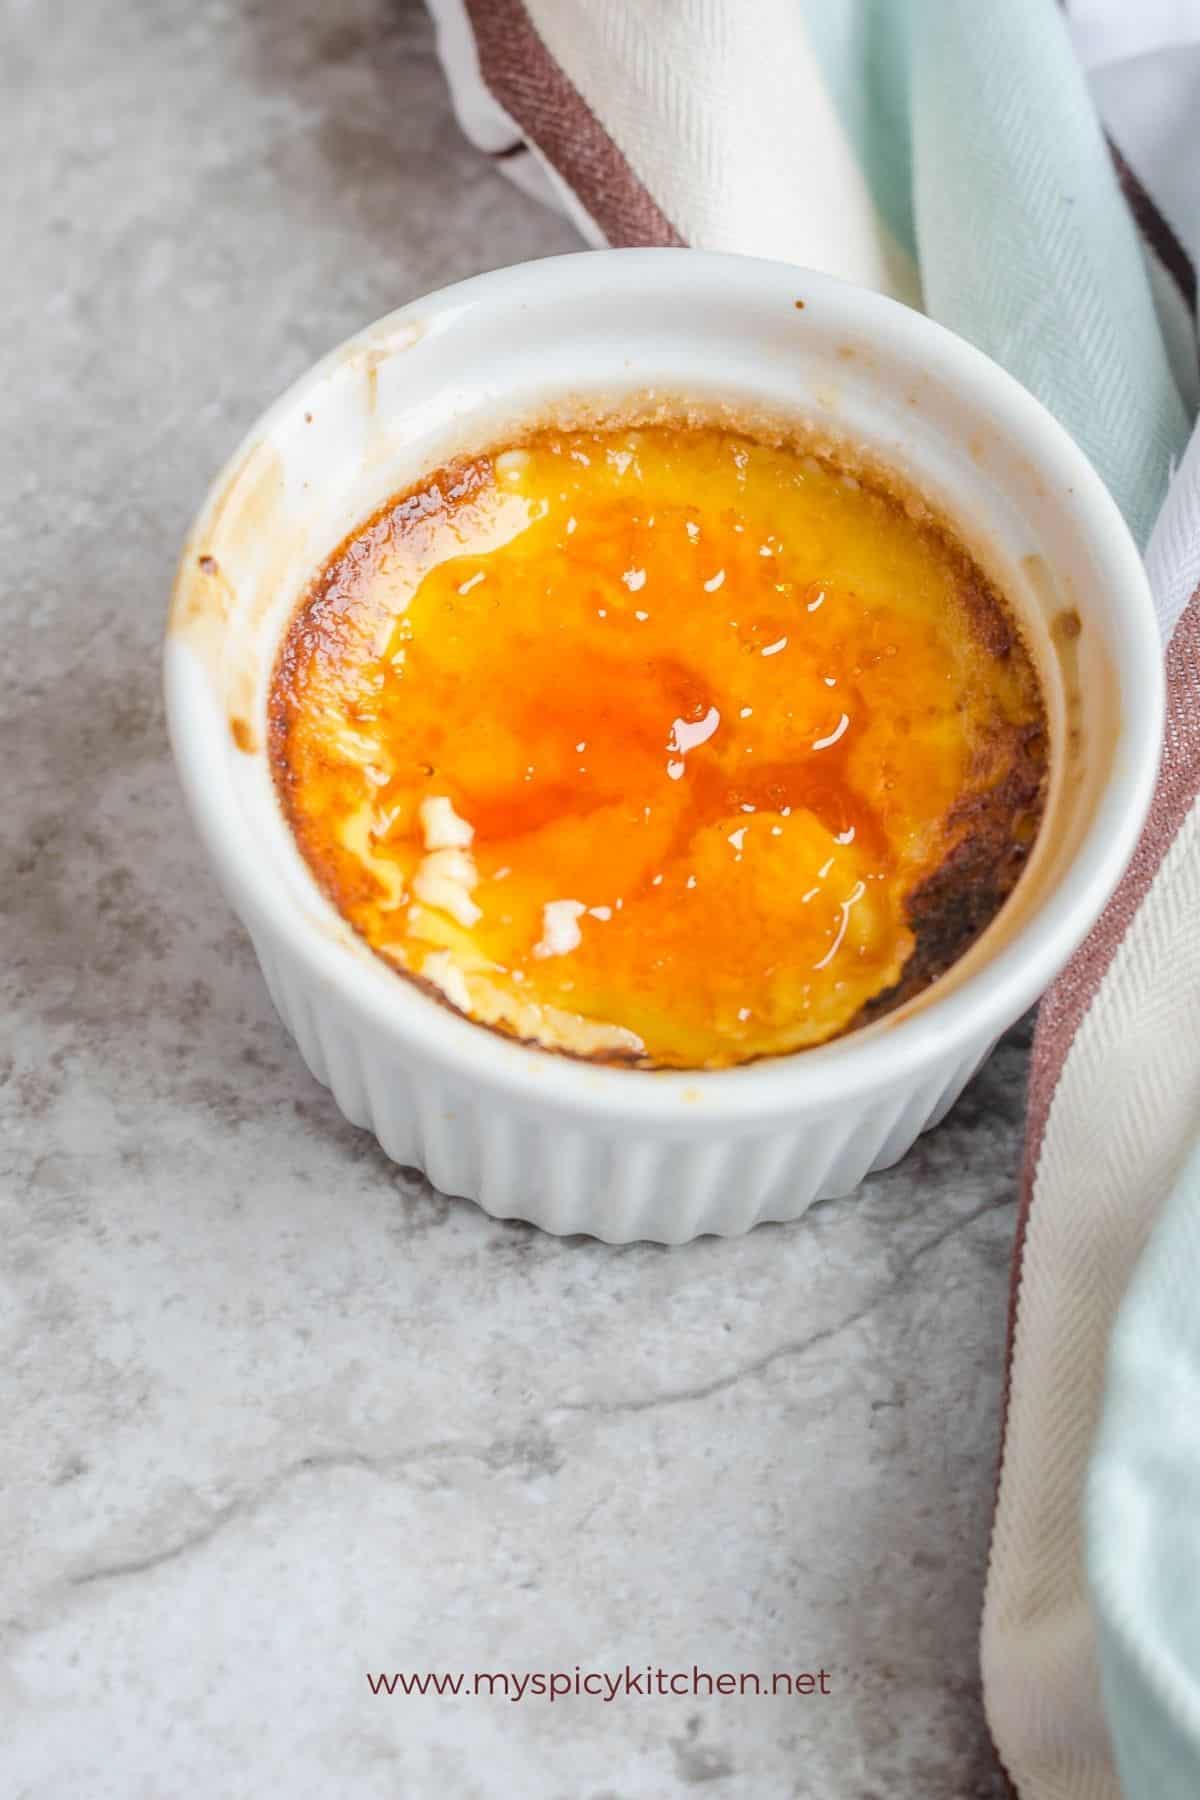 Ramekin of French caramel custard and a part of kitchen towel on the right.